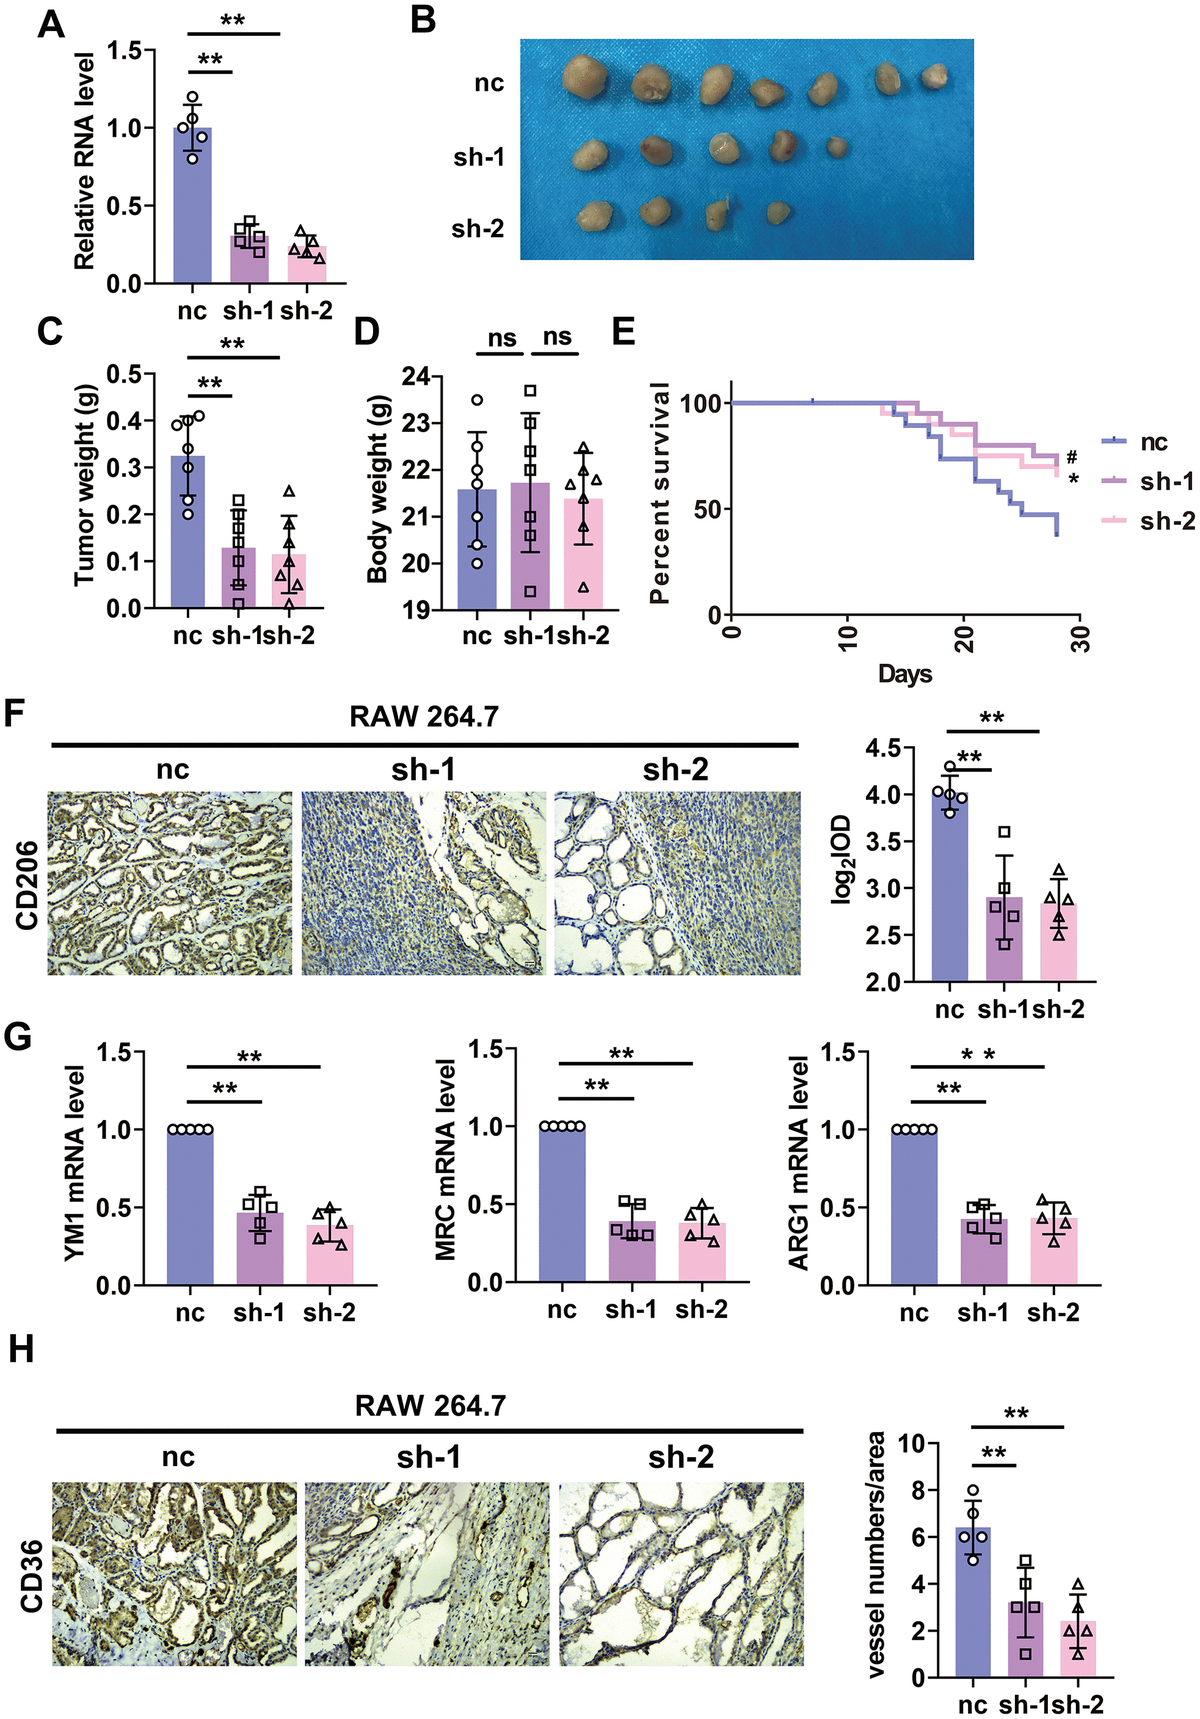 Silencing of lncRNA-SNHG1 in RAW264.7 cells inhibited tumor growth and angiogenesis. (A) qRT-PCR analysis was performed to measure the RNA level of lncRNA-SNHG1 after transfection of Adv-lncRNA-SNHG1 in RAW264.7 cells. Two-tailed t-test was used for the statistical analysis. n=5 independent cell cultures. The bar indicates the SD values. **PB, C) The tumors formed in mice at the endpoint of mice study. Two-tailed t-test was used for the statistical analysis. n=7 mice per group. The bar indicates the SD values. **PD) Body weight of mice was measured at the endpoint of mice study. Two-tailed t-test was used for the statistical analysis. n=7 mice per group. The bar indicates the SD values. **PE) Survival curve was shown by counting dead mice of three groups. n=20 mice per group. #PF) IHC staining of CD206 of tumor tissues was performed. Two-tailed t-test was used for the statistical analysis. n=5 mice per group. The bar indicates the SD values. **PG) qRT-PCR analysis was performed to measure the RNA level of M2 polarization markers in tumor tissues. n=5 mice per group. The bar indicates the SD values. **PH) IHC staining of CD31 of tumor tissues was performed. Two-tailed t-test was used for the statistical analysis. n=5 mice per group. The bar indicates the SD values. **P